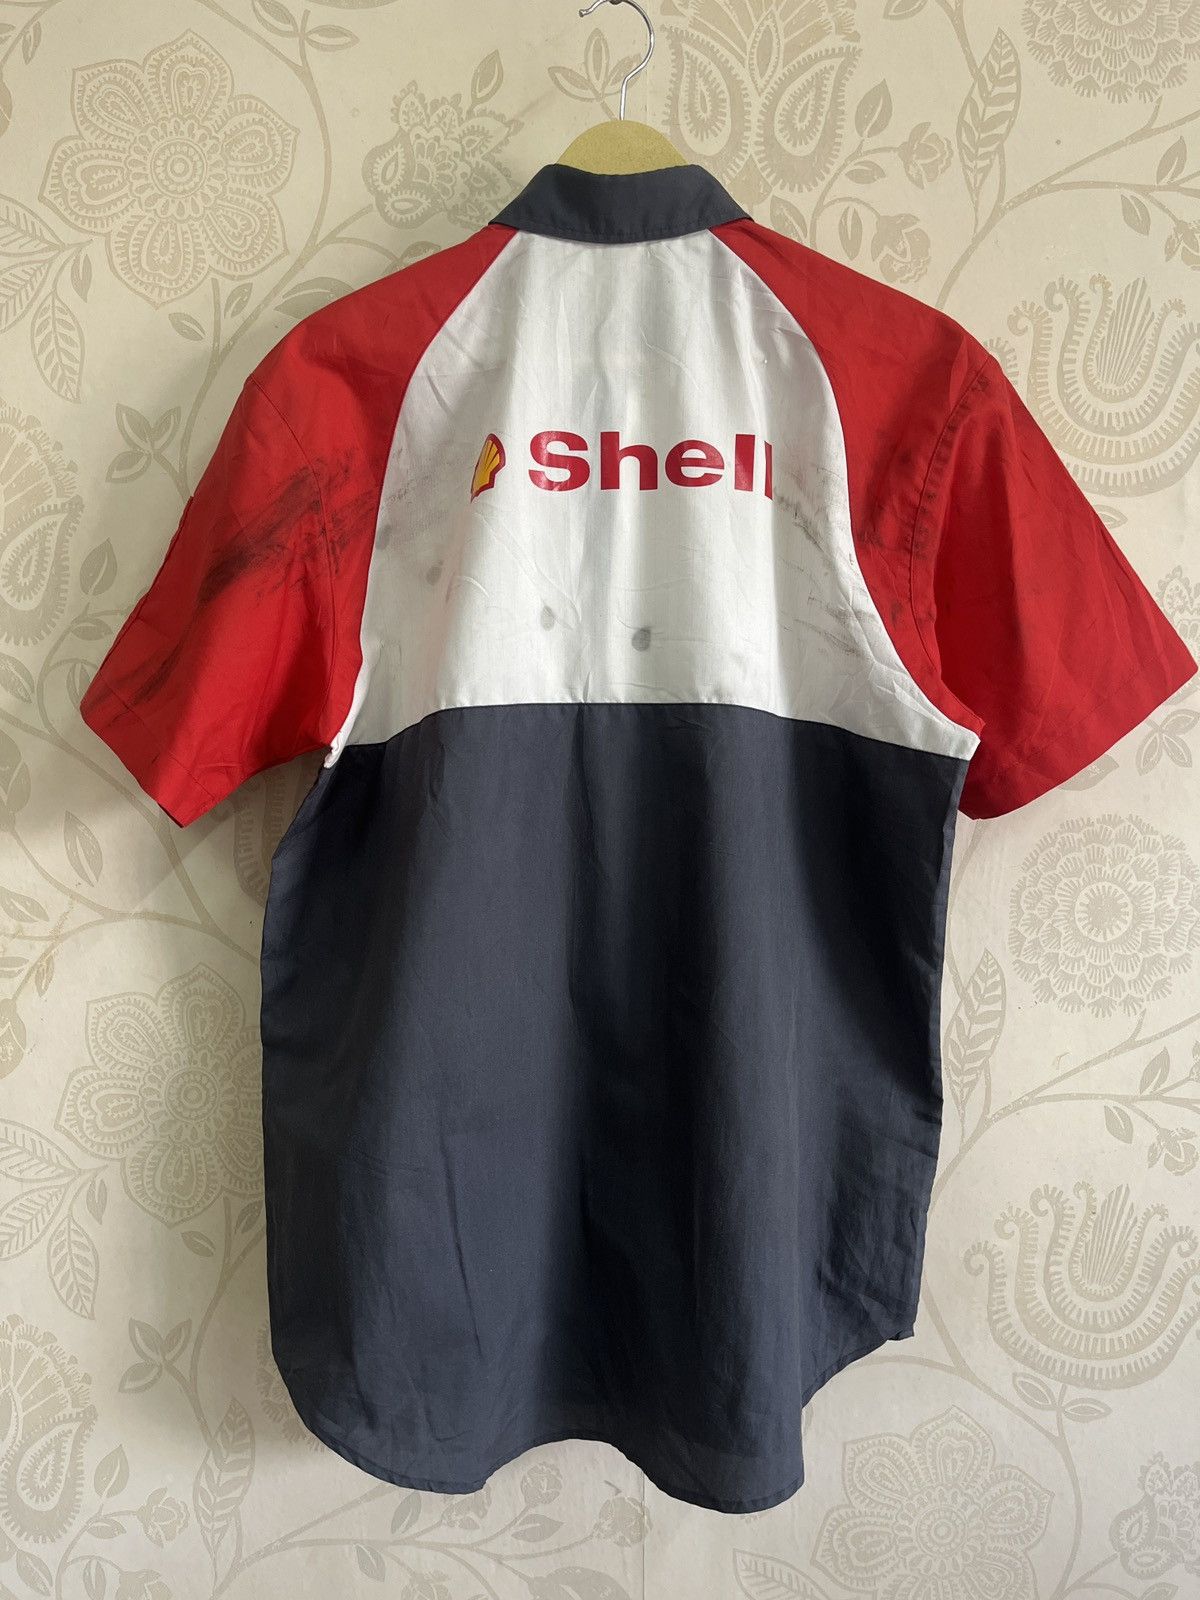 Vintage Shell Workers Uniform Shirts Japan - 4